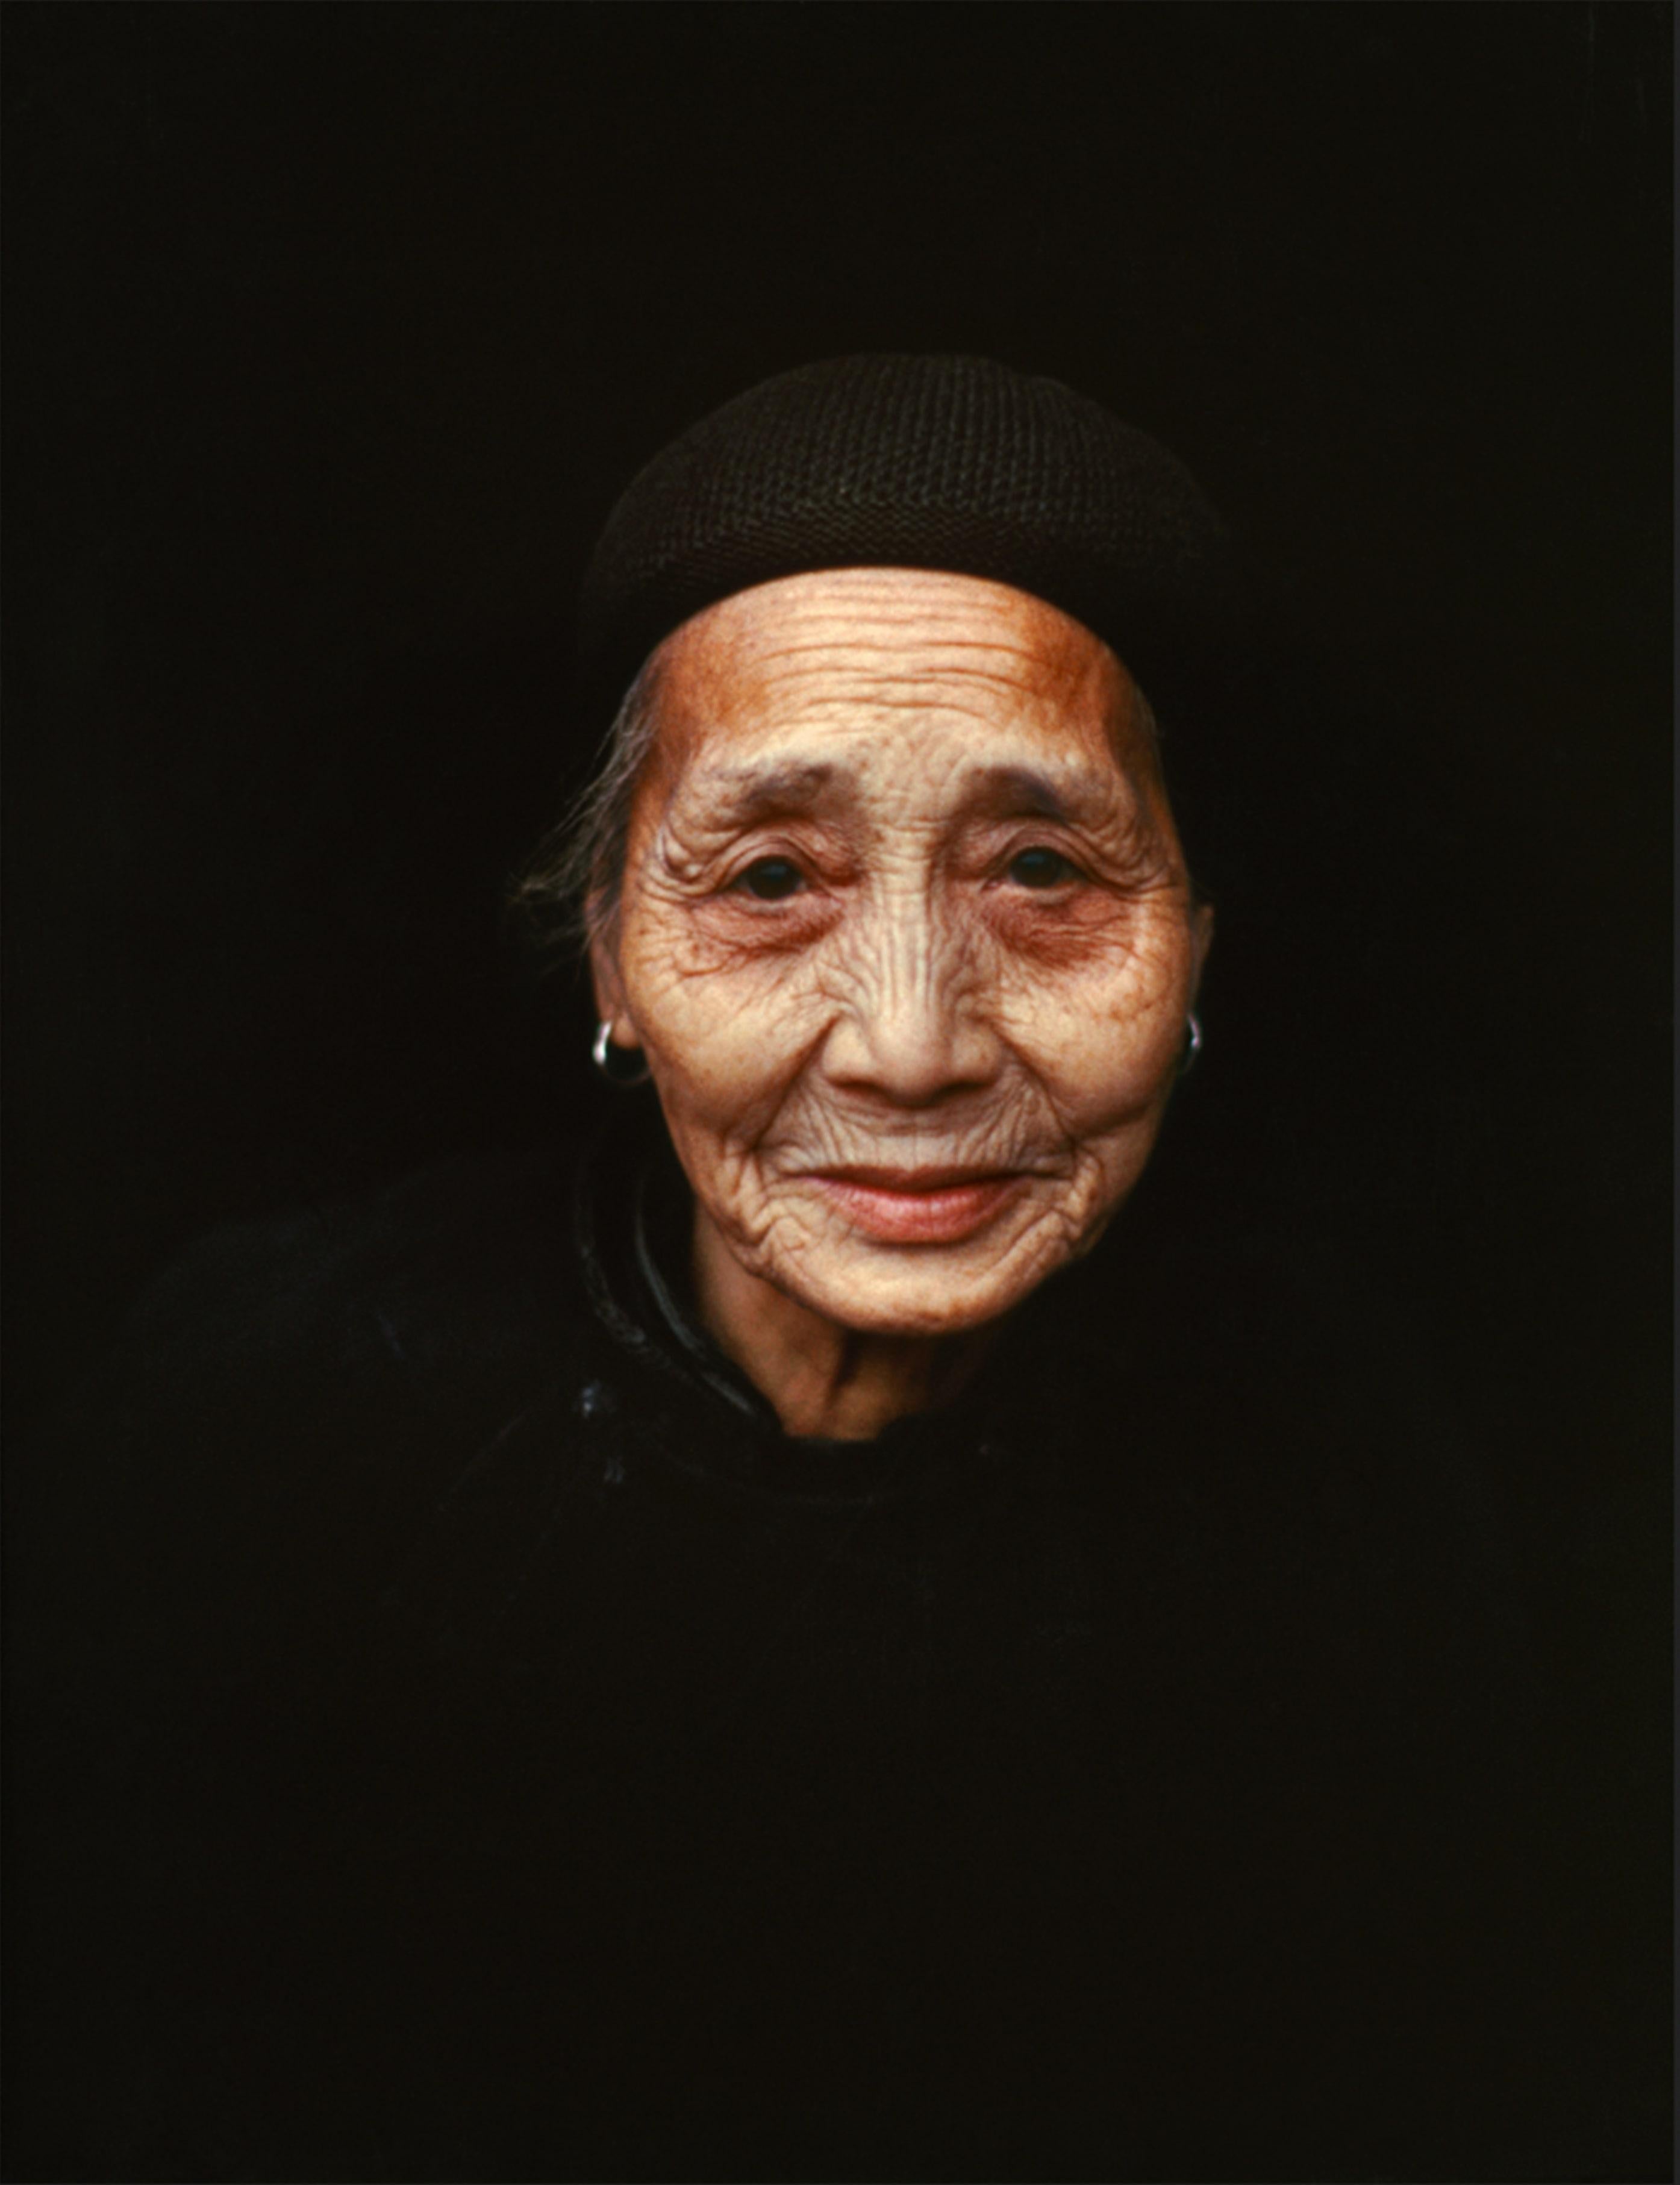 A retired woman, China, 1979.

All available sizes and editions:
24" x 20", Edition of 25 + 3 Artist Proofs
34" x 24", Edition of 25 + 3 Artist Proofs

"Eve Arnold, born in 1912 to Russian-immigrant parents in Philadelphia, began her photography